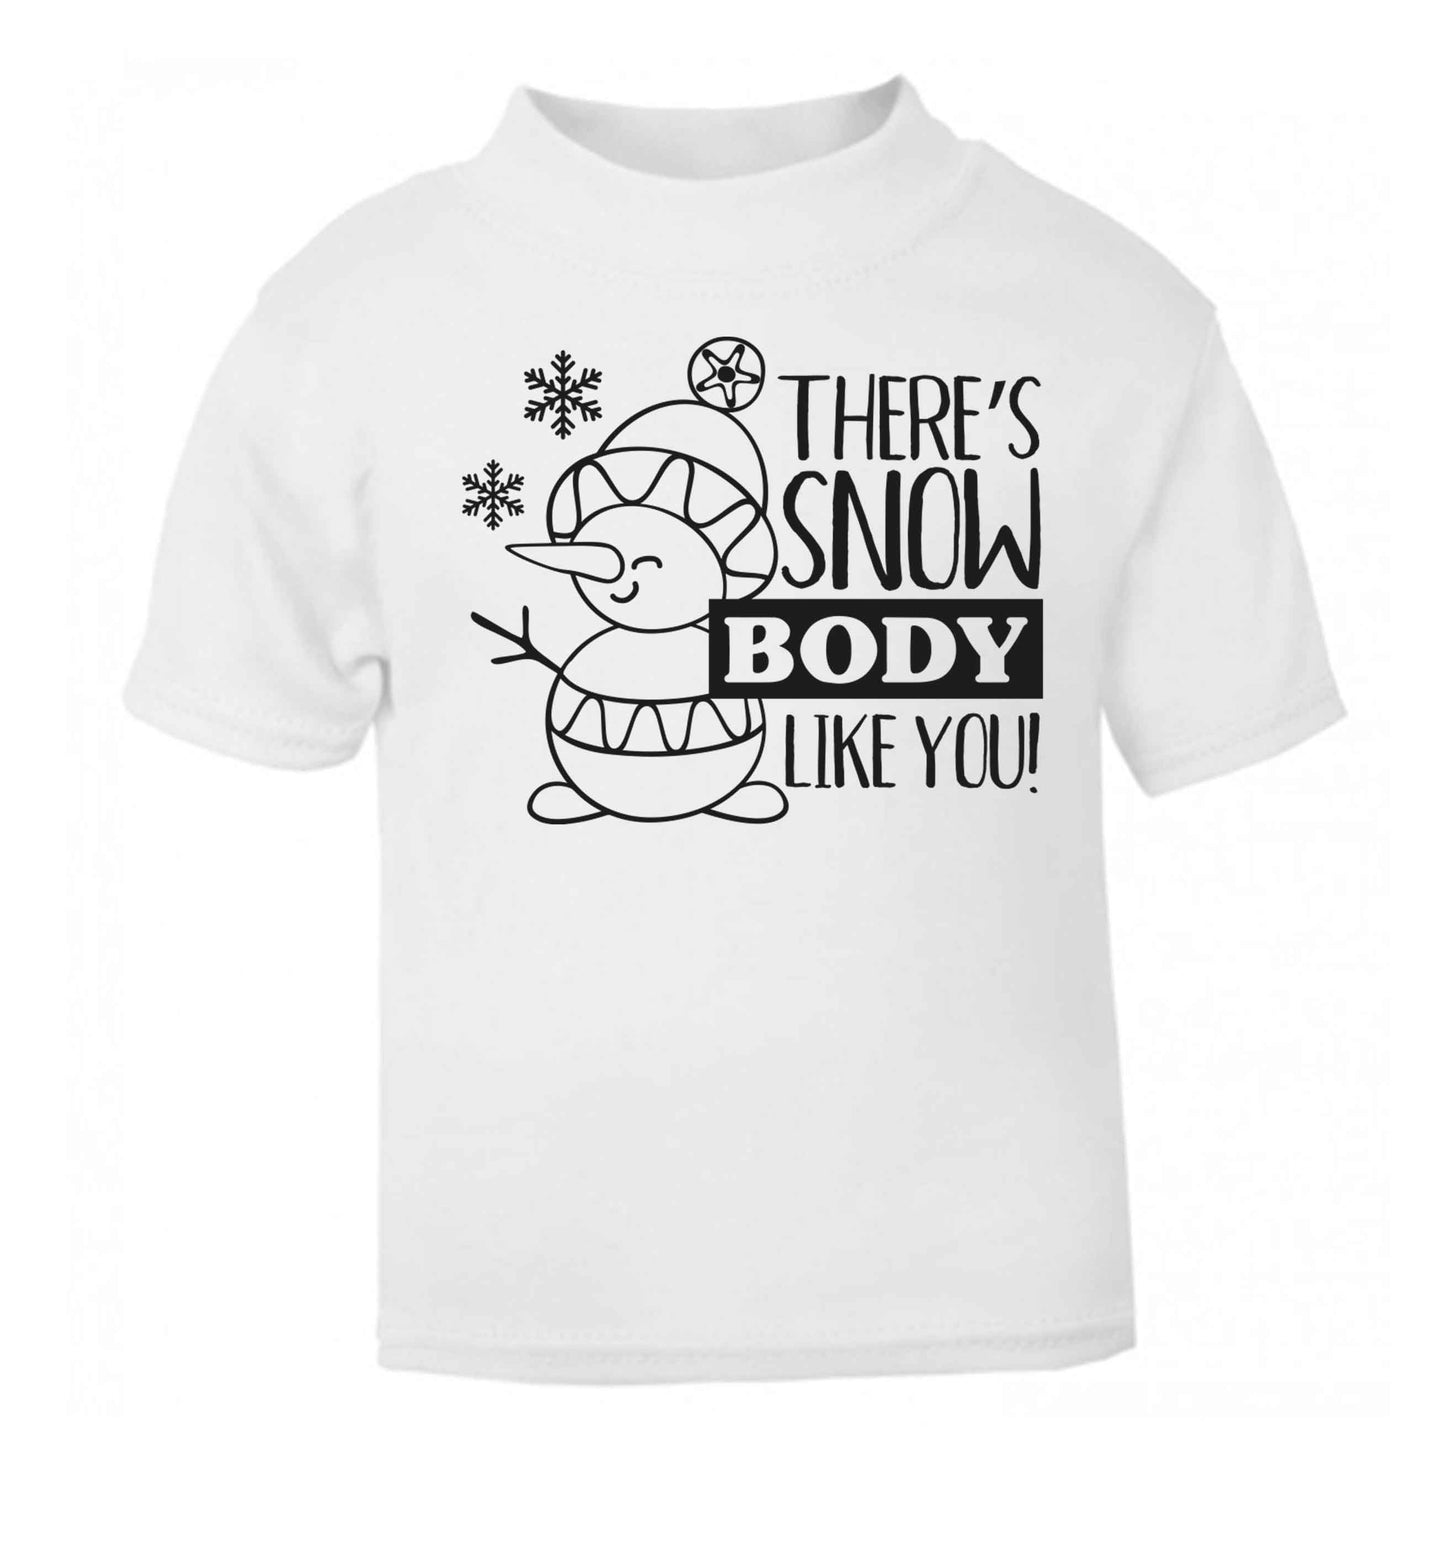 There's snow body like you white baby toddler Tshirt 2 Years